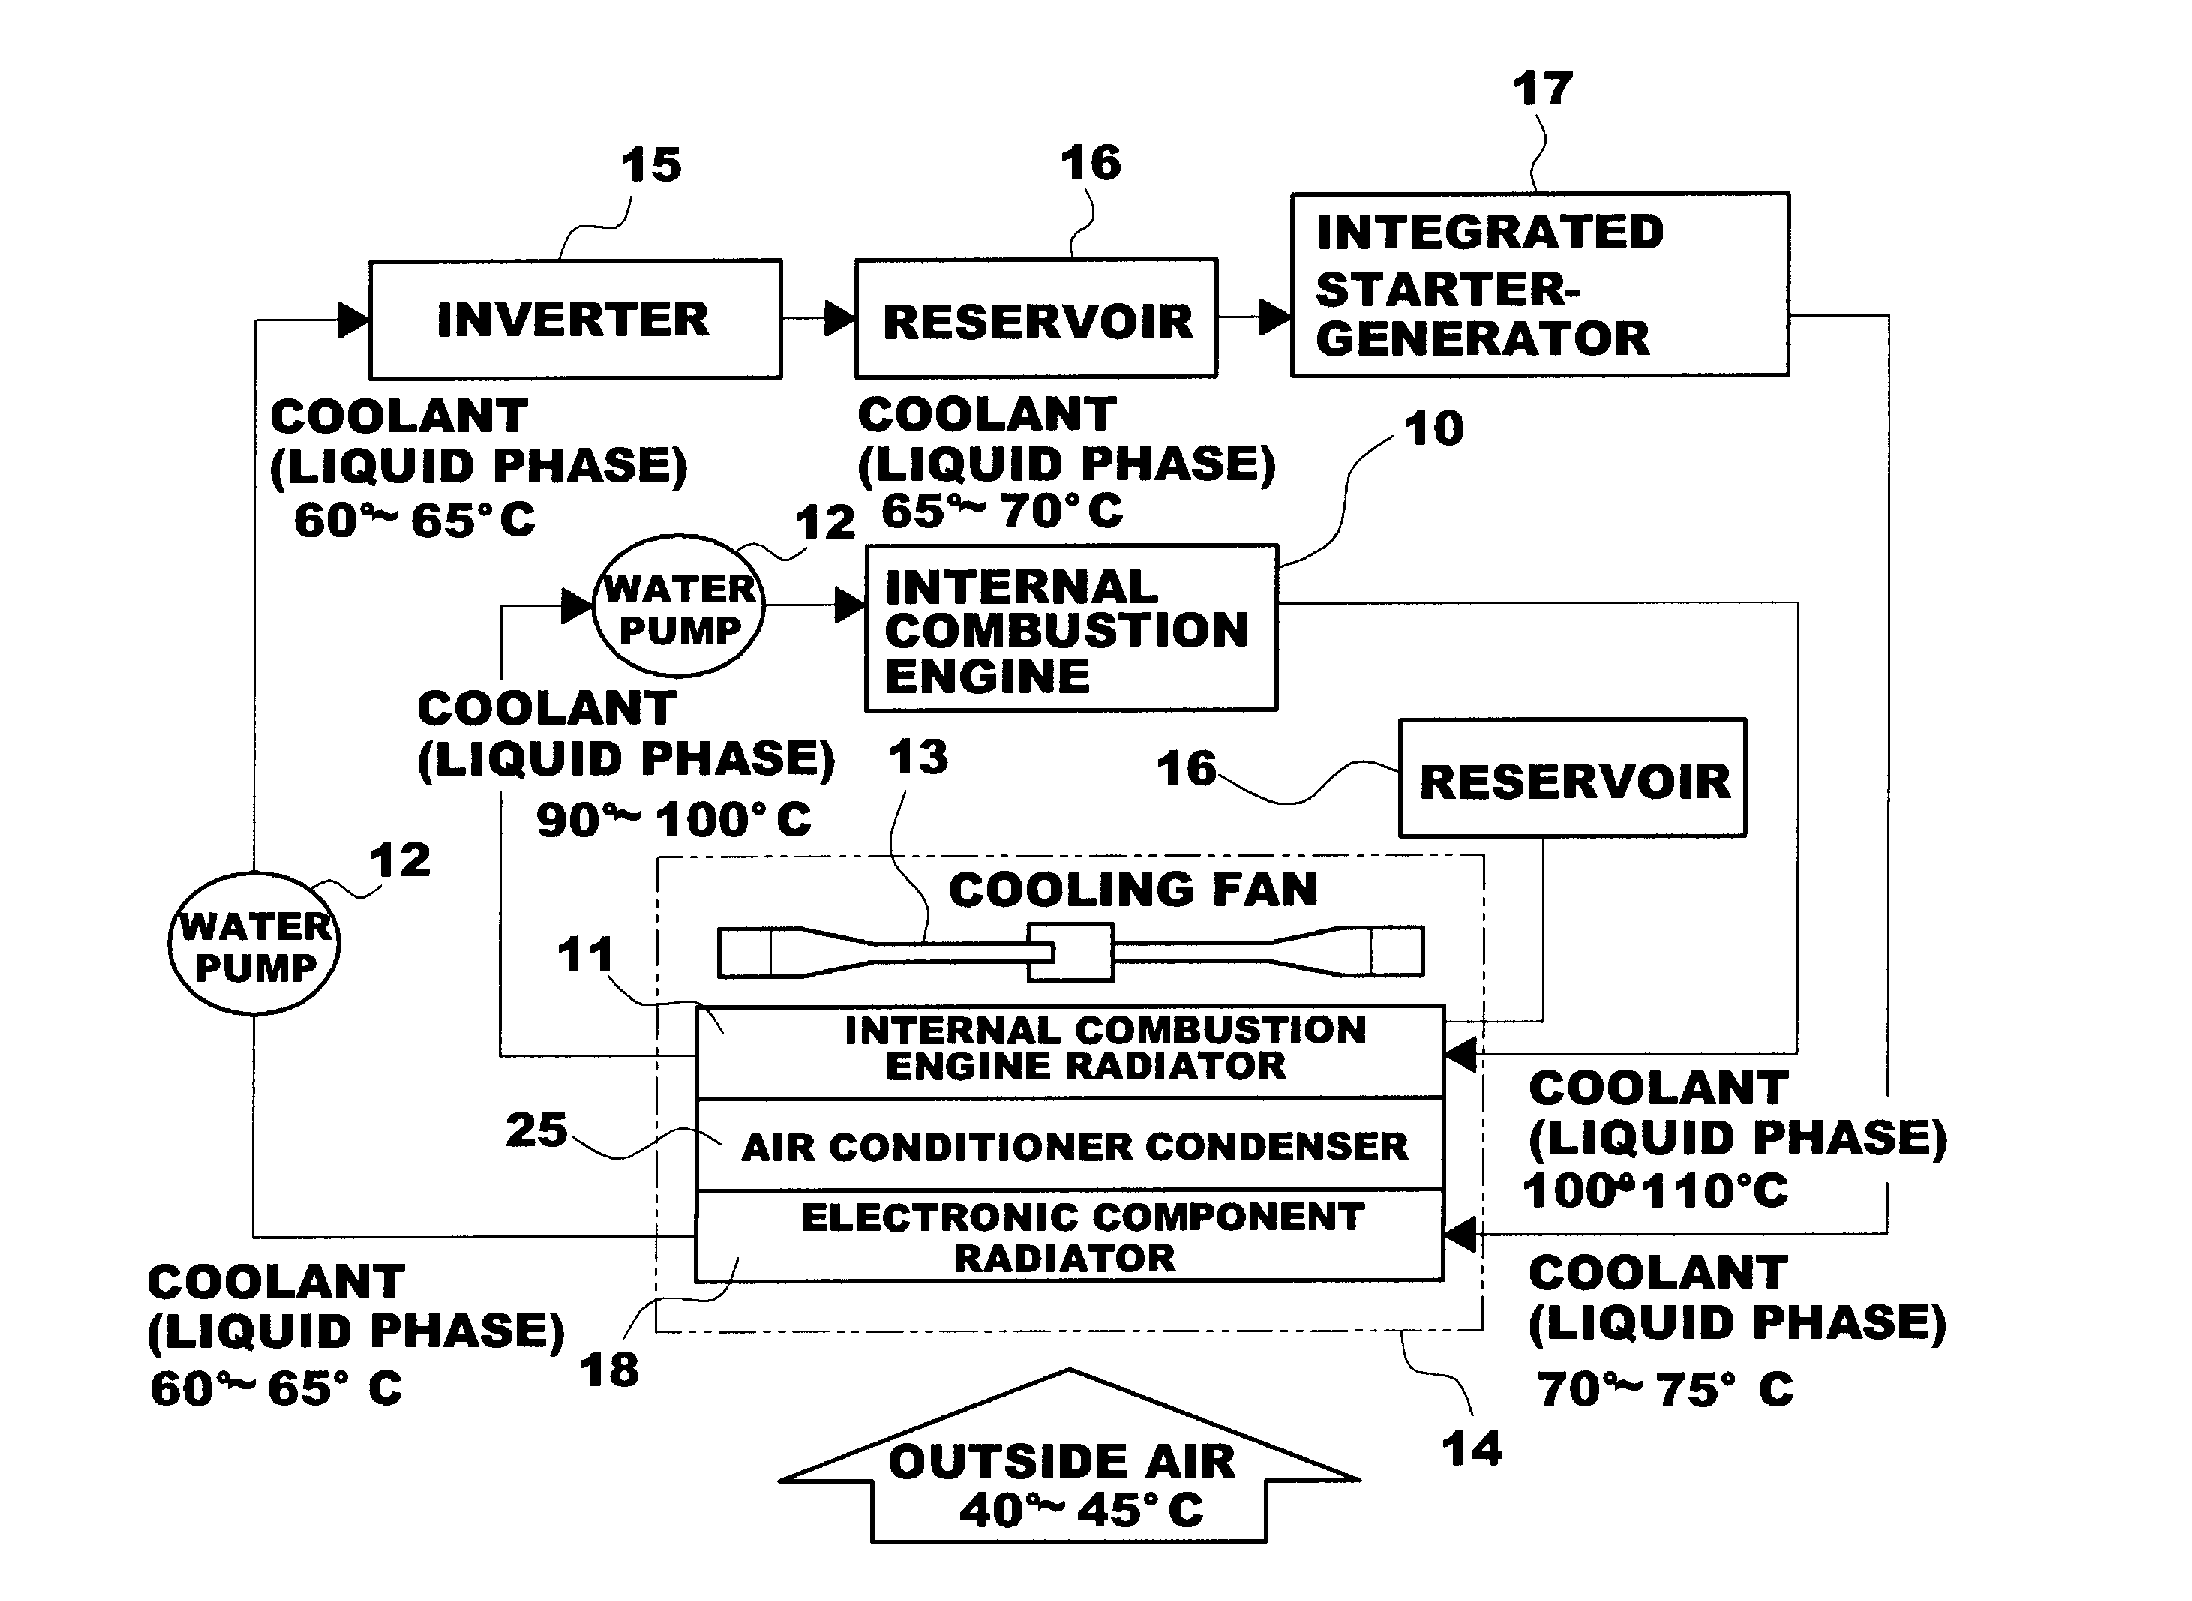 Evaporation Cycle Heat Exchange System for Vehicle